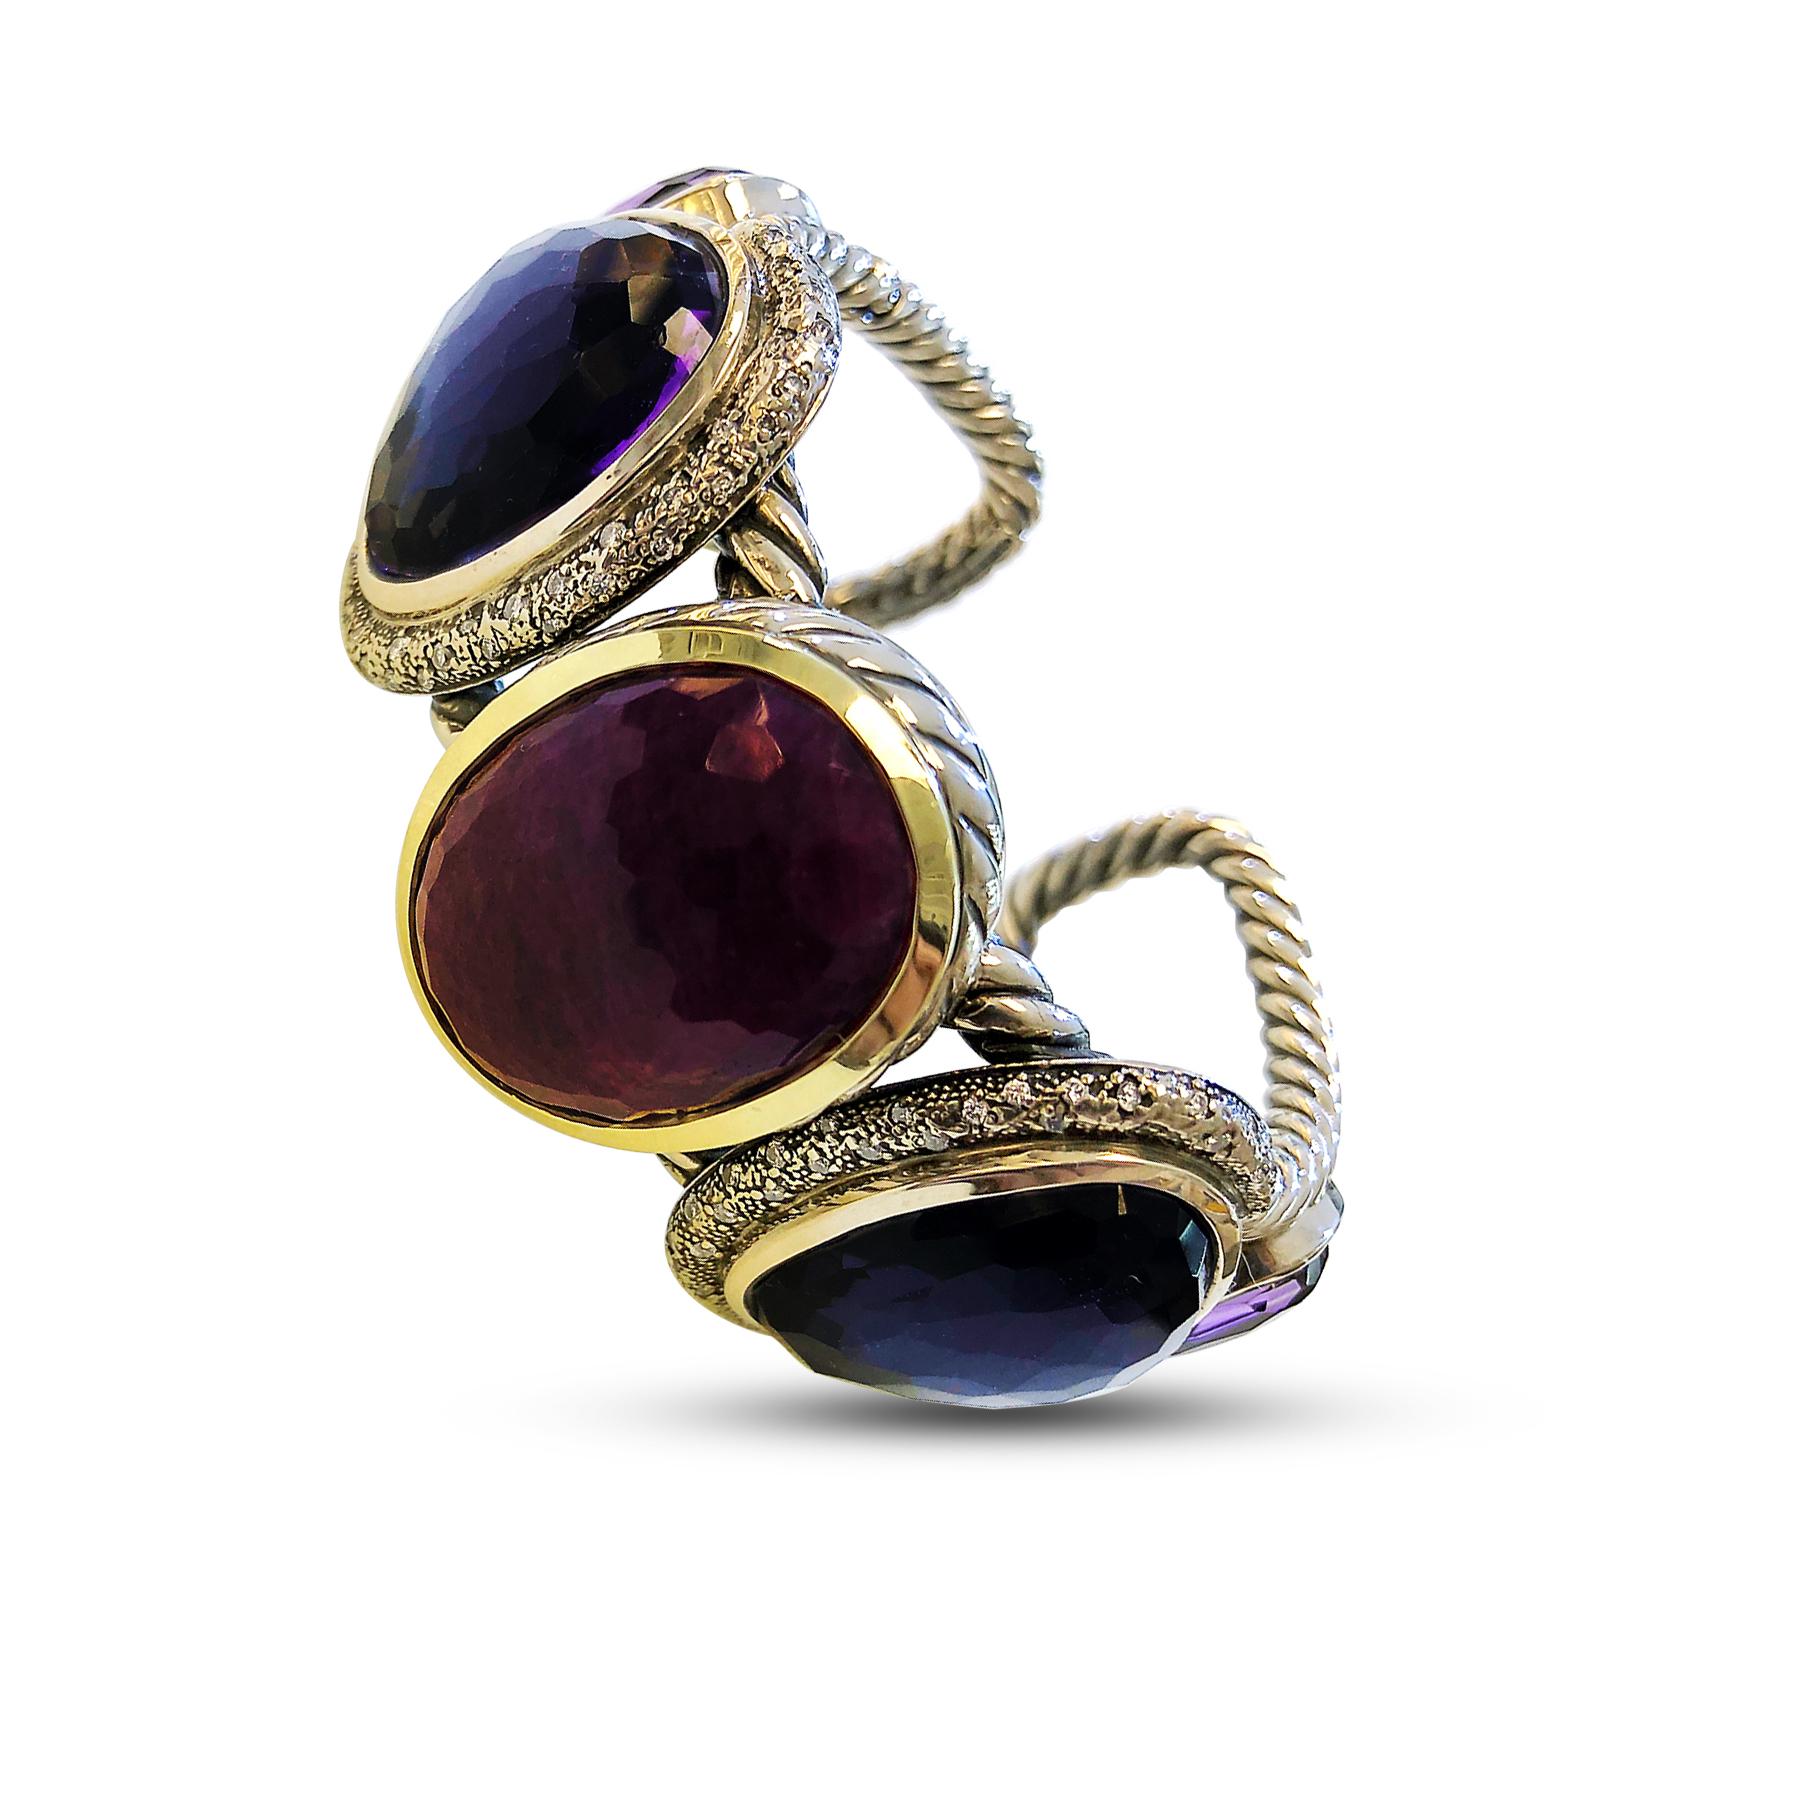 Like every David Yurman's product, this is 'founded by Artists and rooted in artistry'. This rare Buckle bangle comes with every artistic imagery you could ever think about. It features a round cut 28mm by 22mm Ruby and 4 round cut 18mm by 14mm and